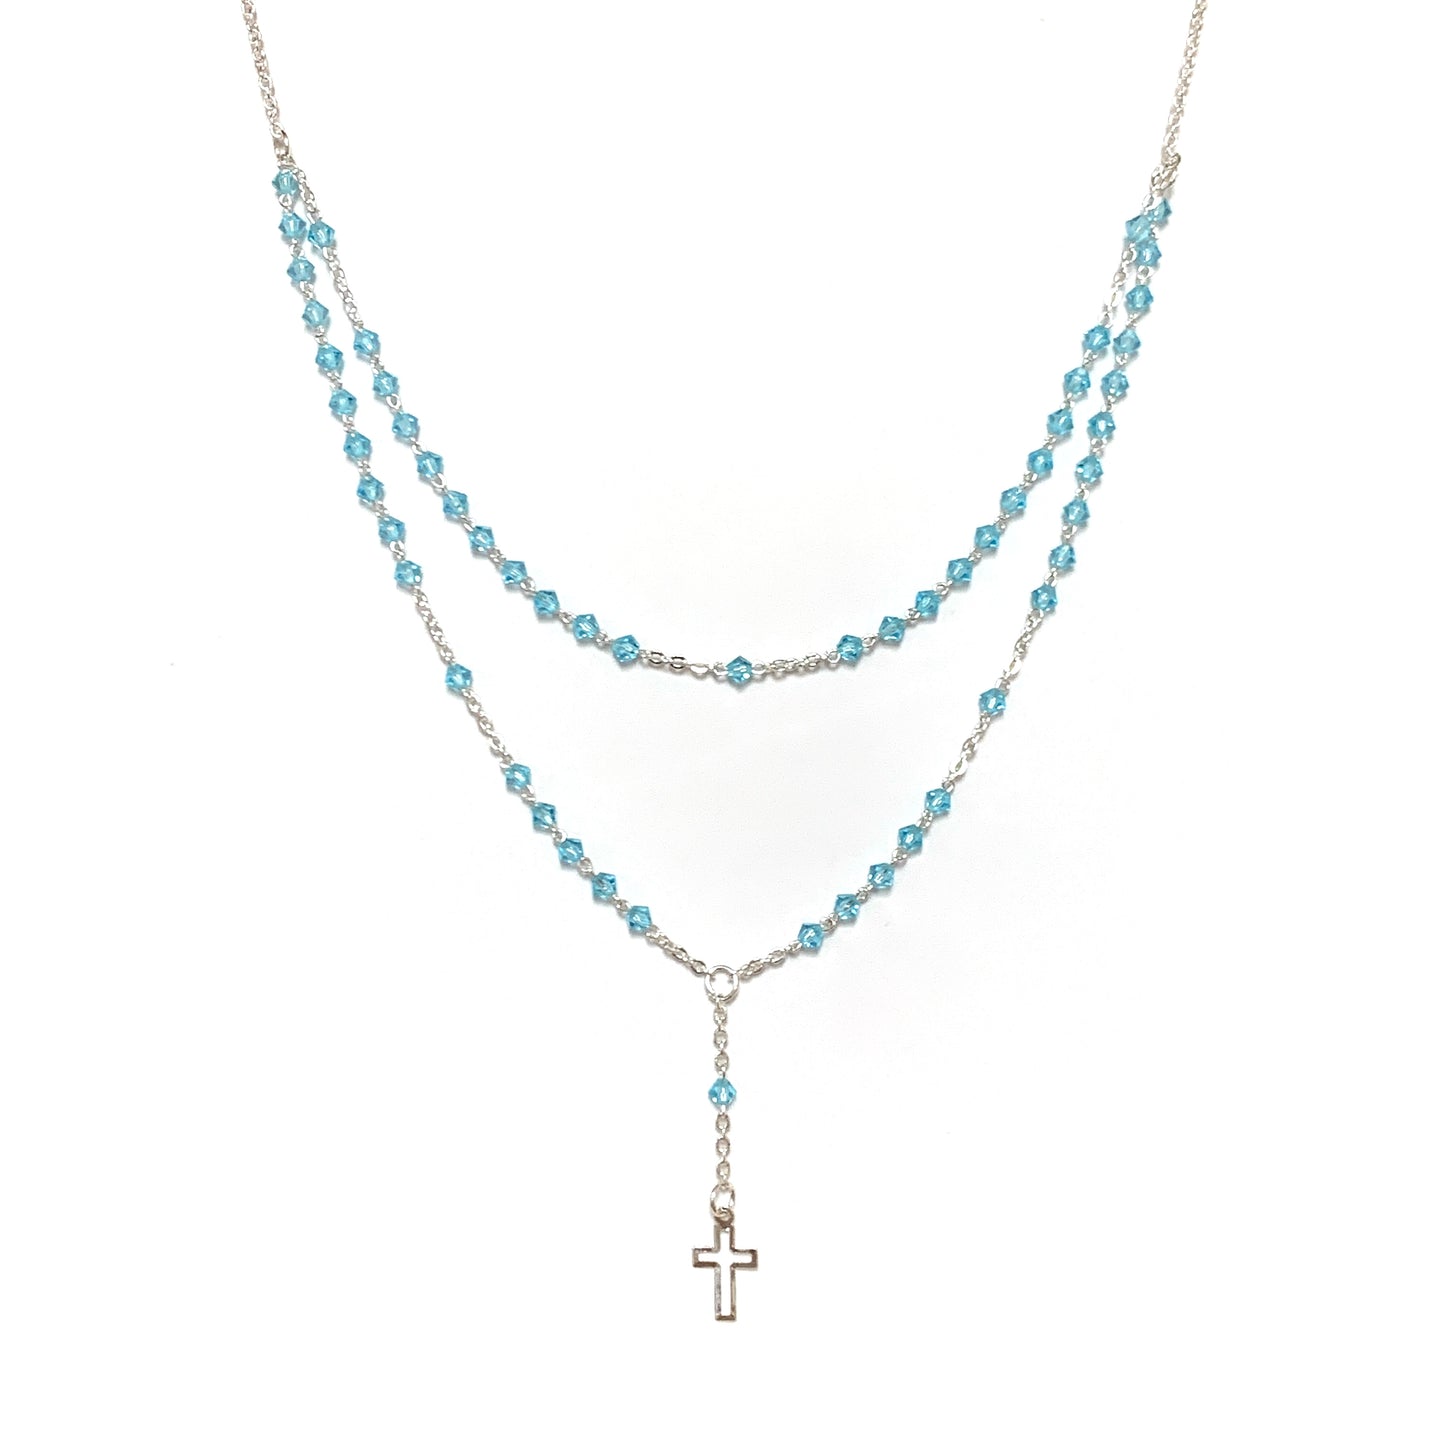 Silver and Crystal Rosary Necklace of Assorted Colors